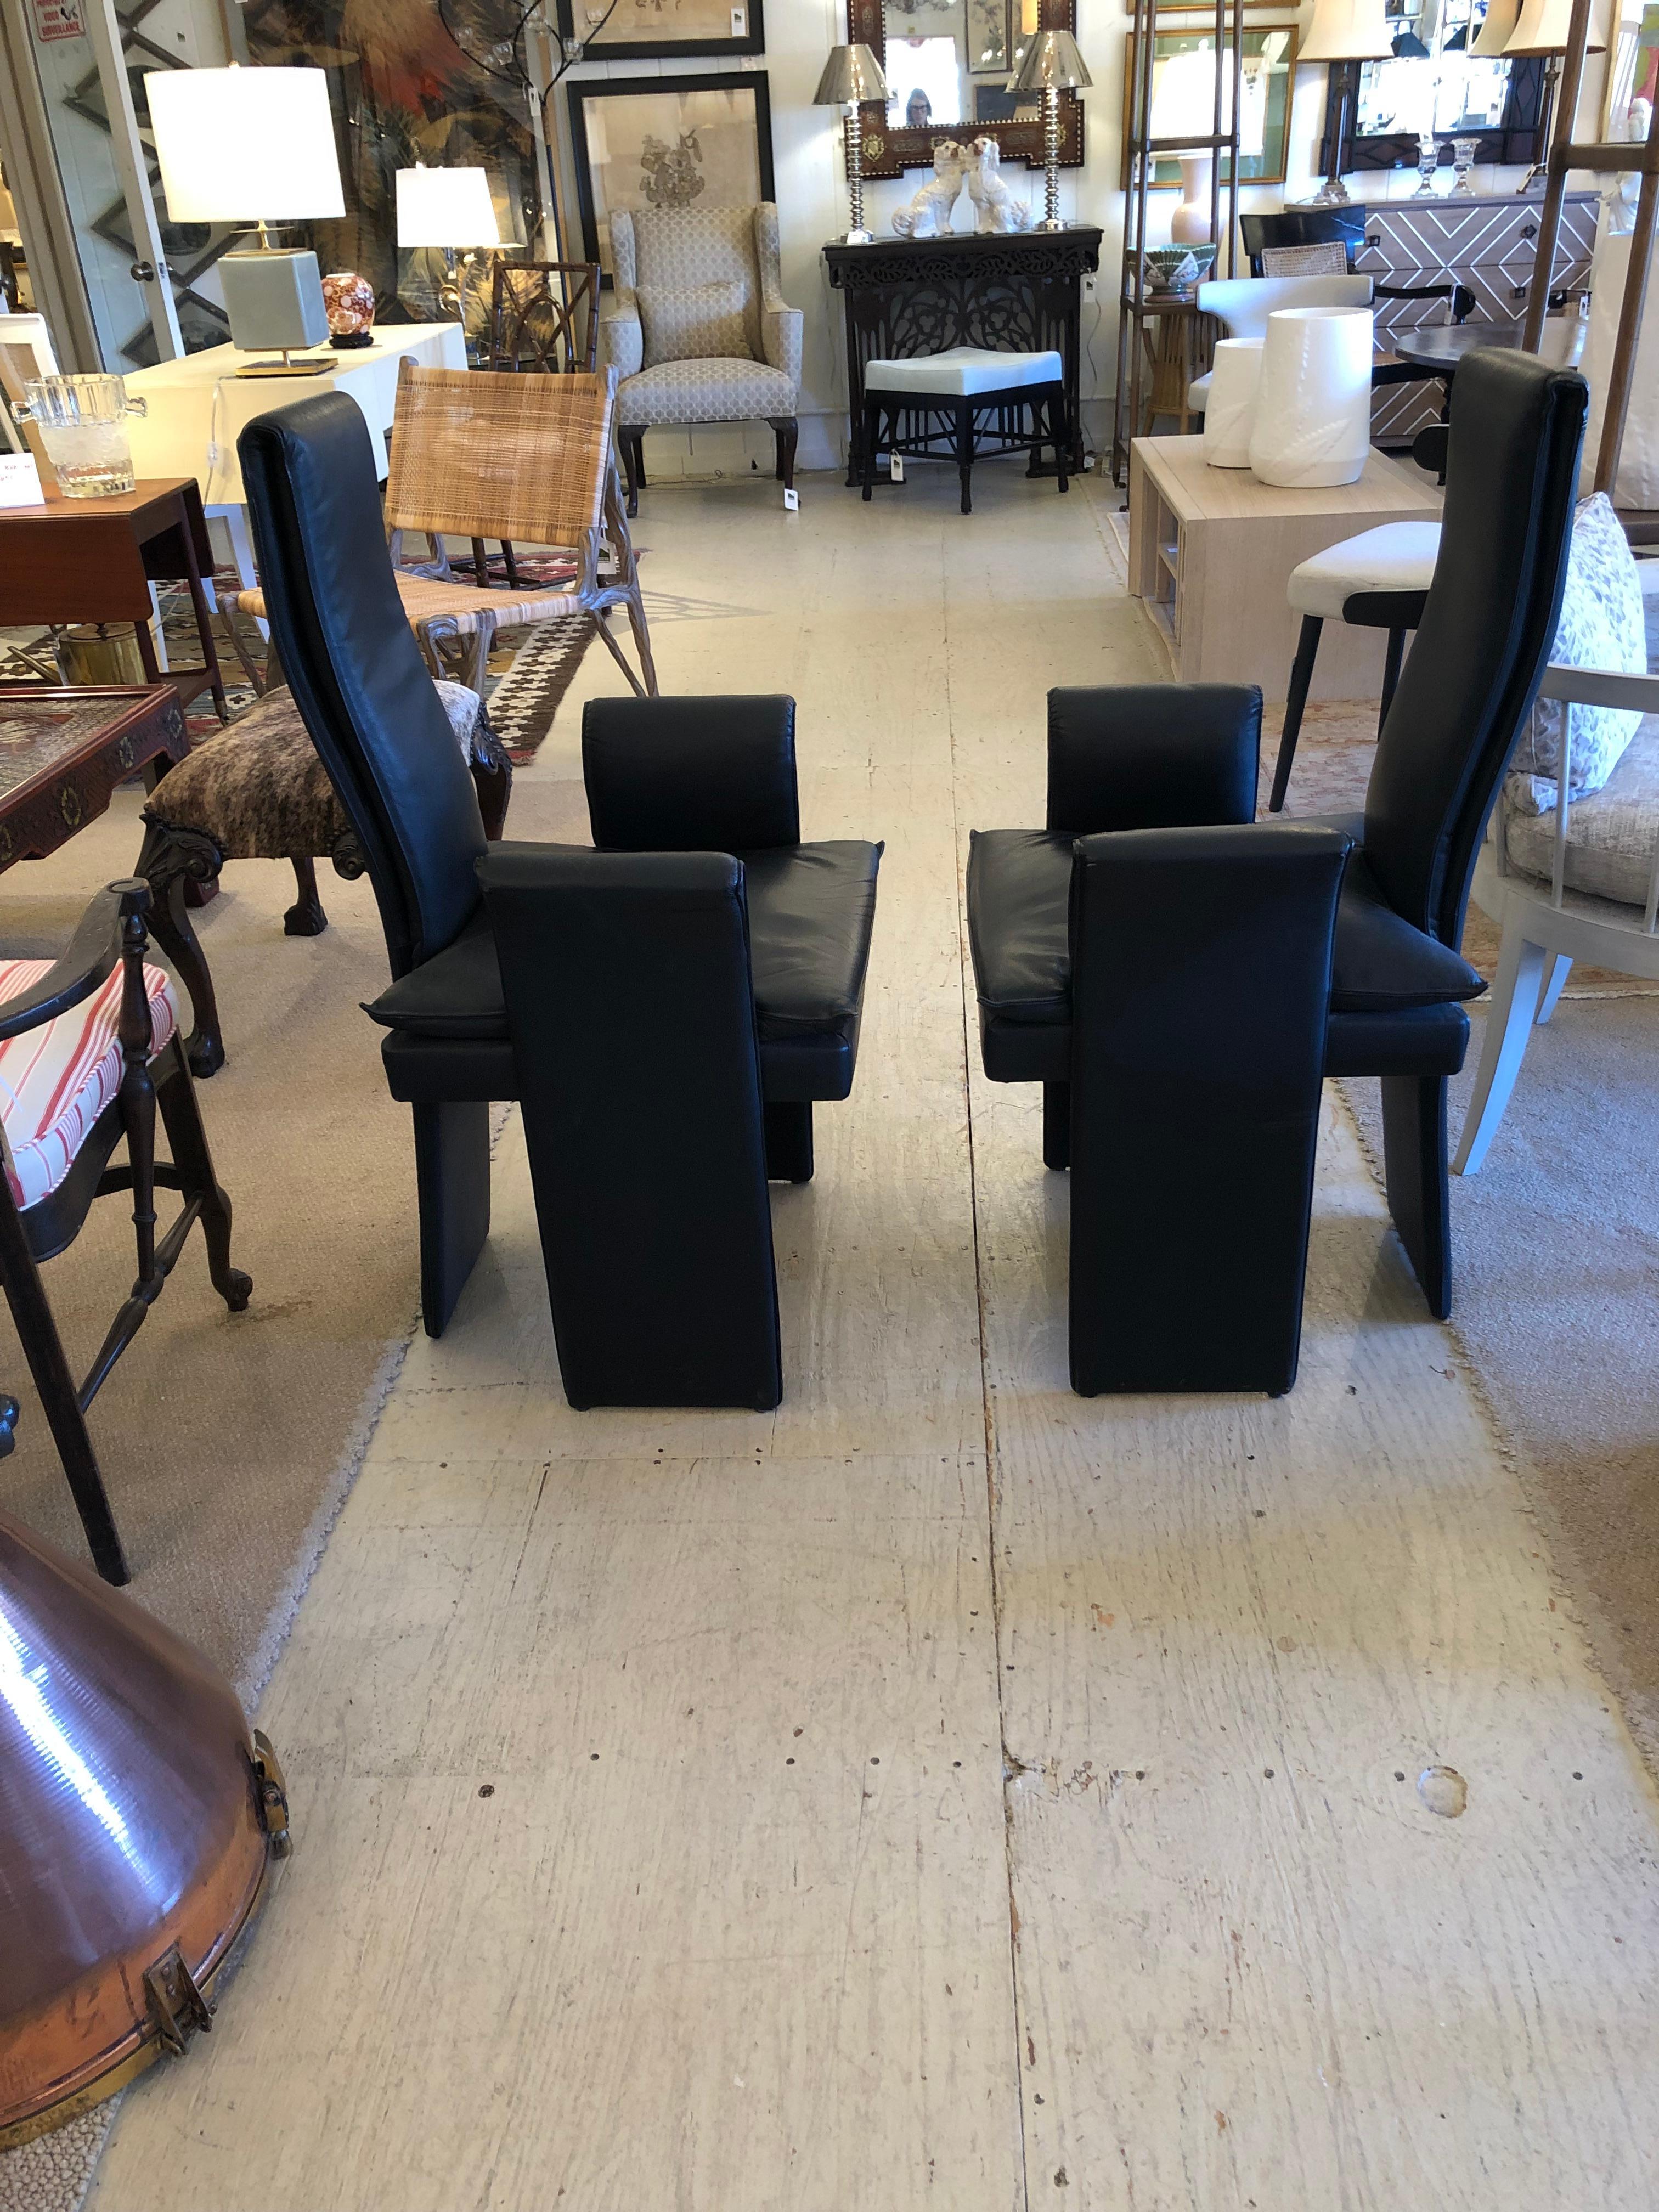 Superbly sculptural Italian Mid-Century Modern armchairs having tall elongated narrow backs that continue downward as the back legs of each chair. The arms jut out and the designer forms make a statement.